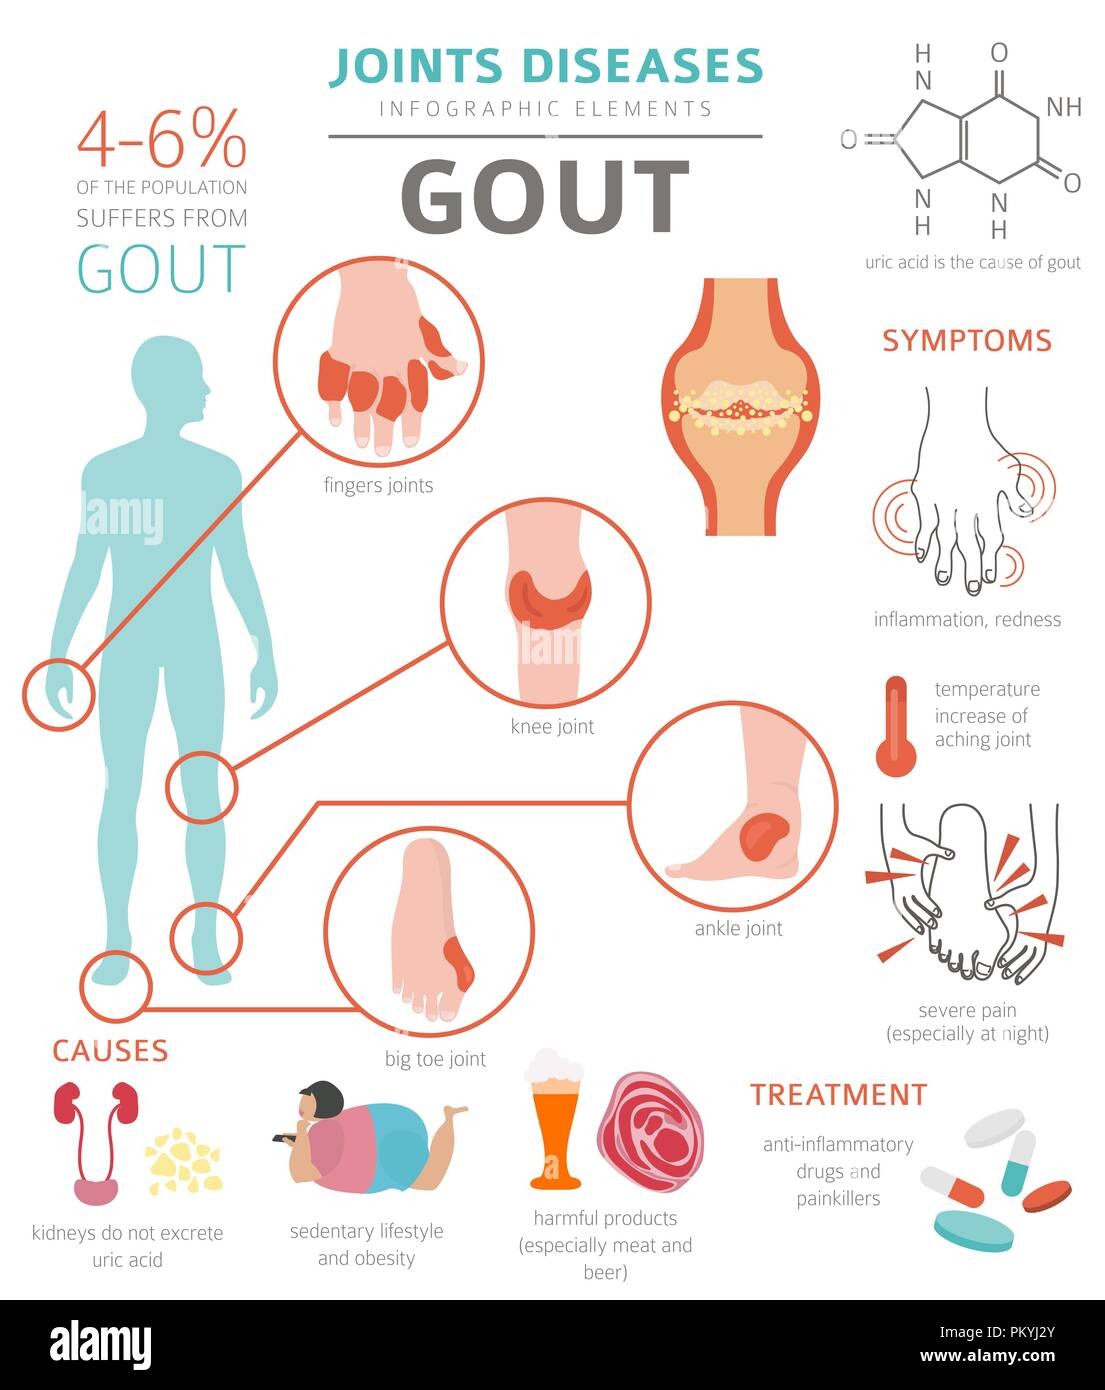 Gout: Joints Diseases  Infographic